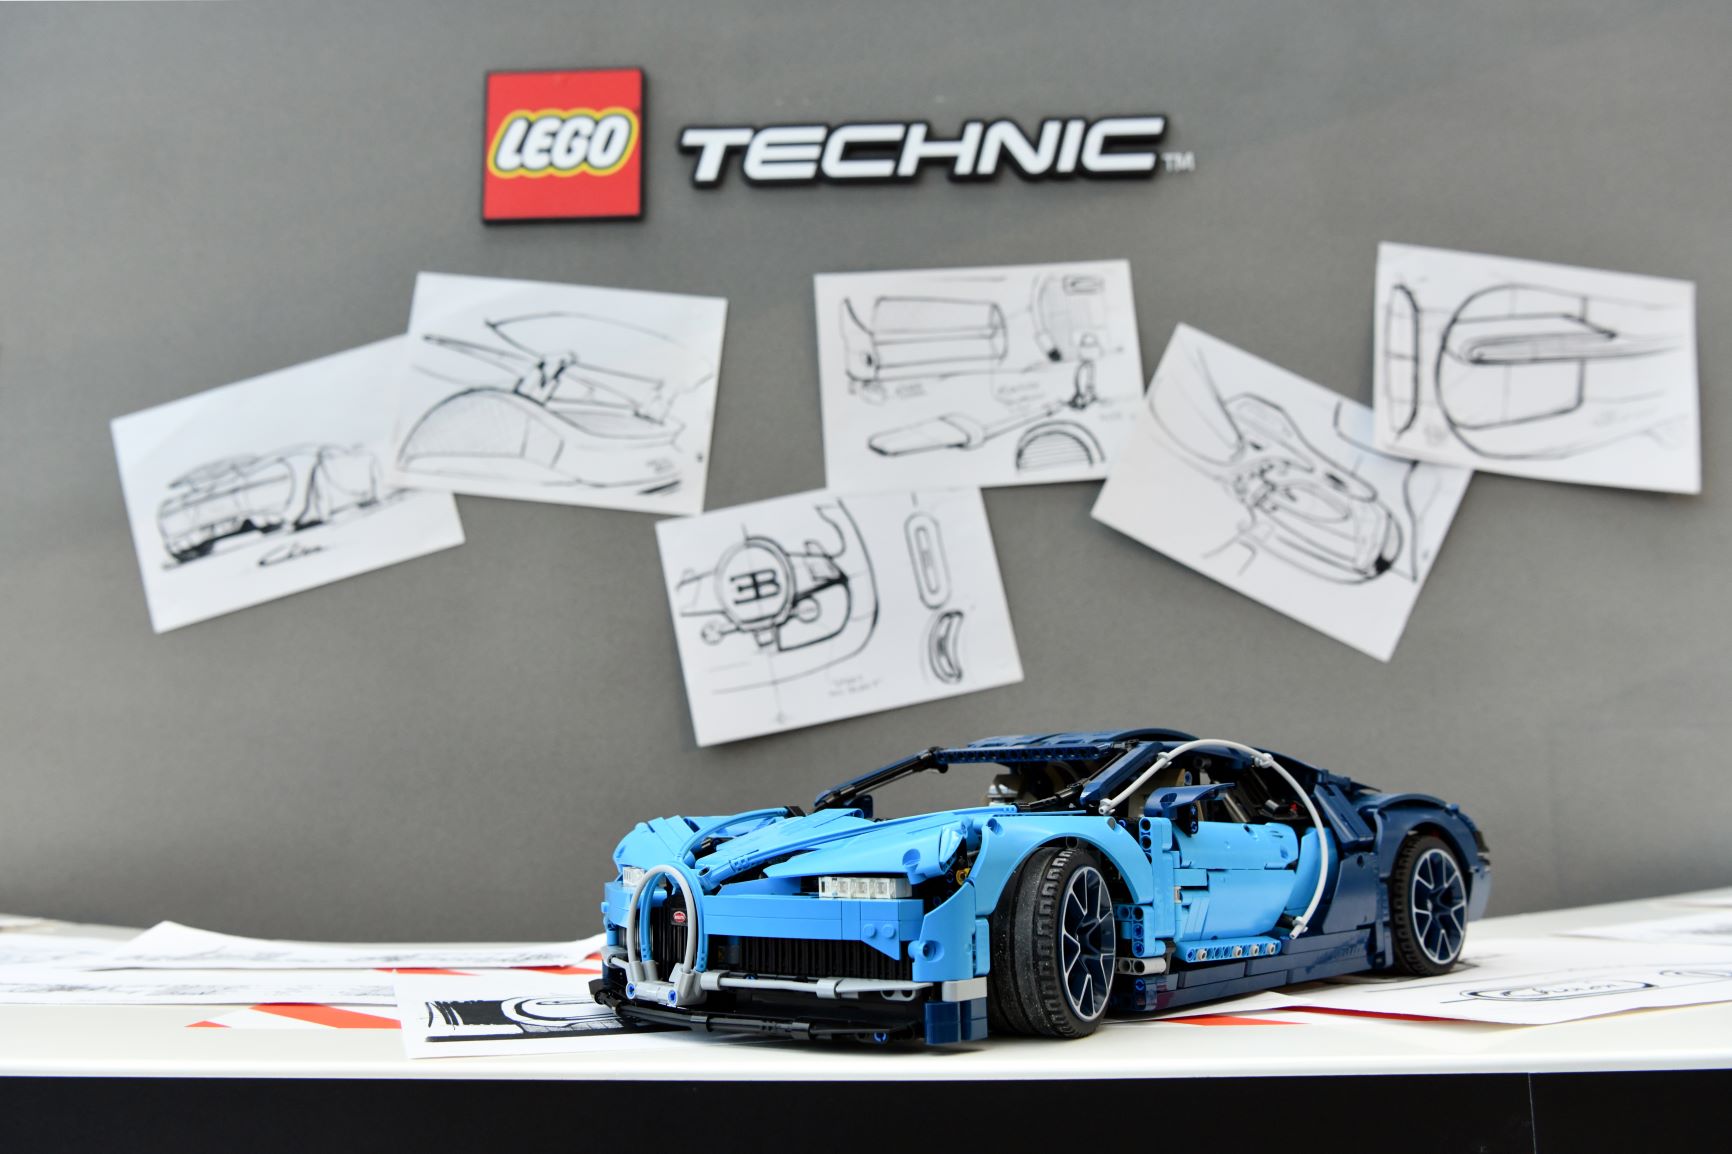 LEGO Technic Launches First Live Brand Experience in China